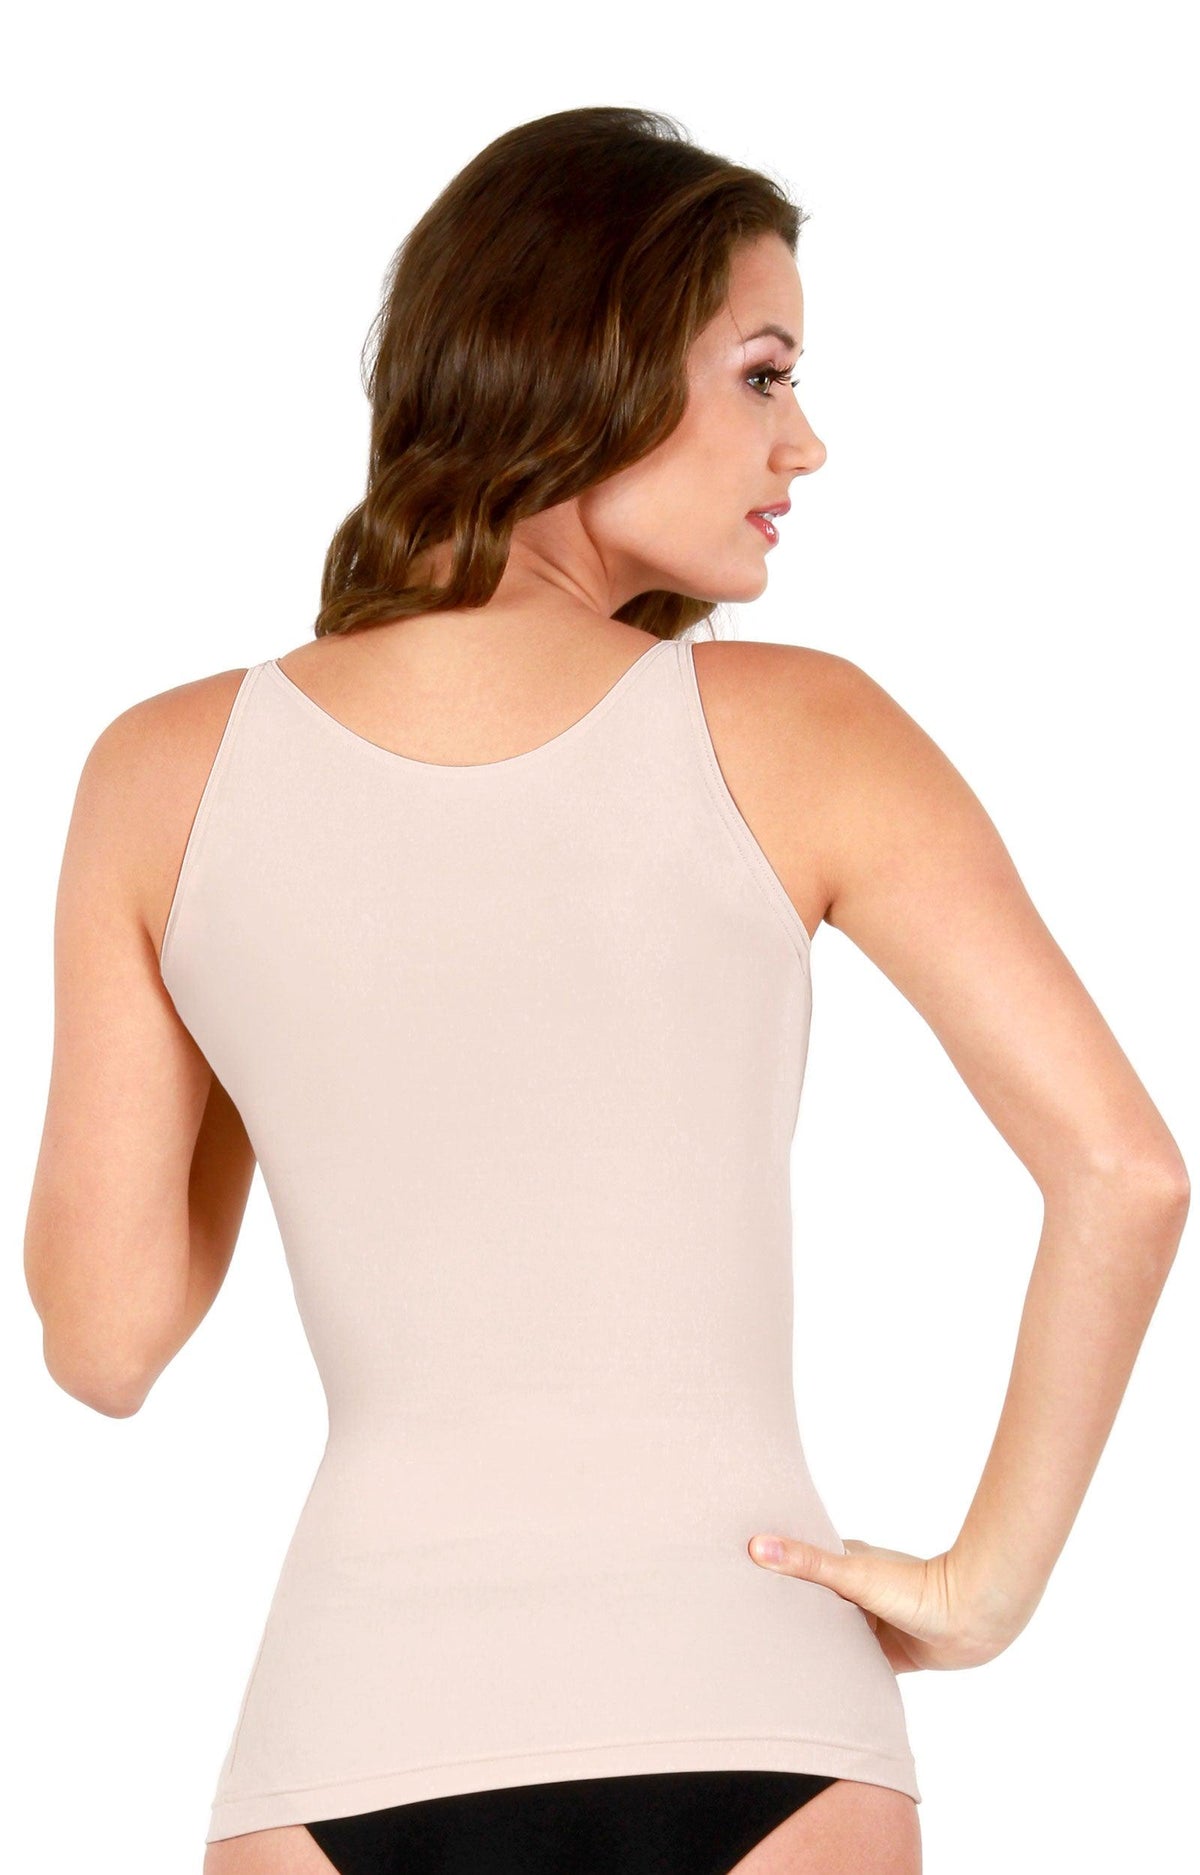 Shapeez no more back fat, muffin-top or visible bra lines with Shapeez back  smoothing bra & bodyshaper solutions prov…